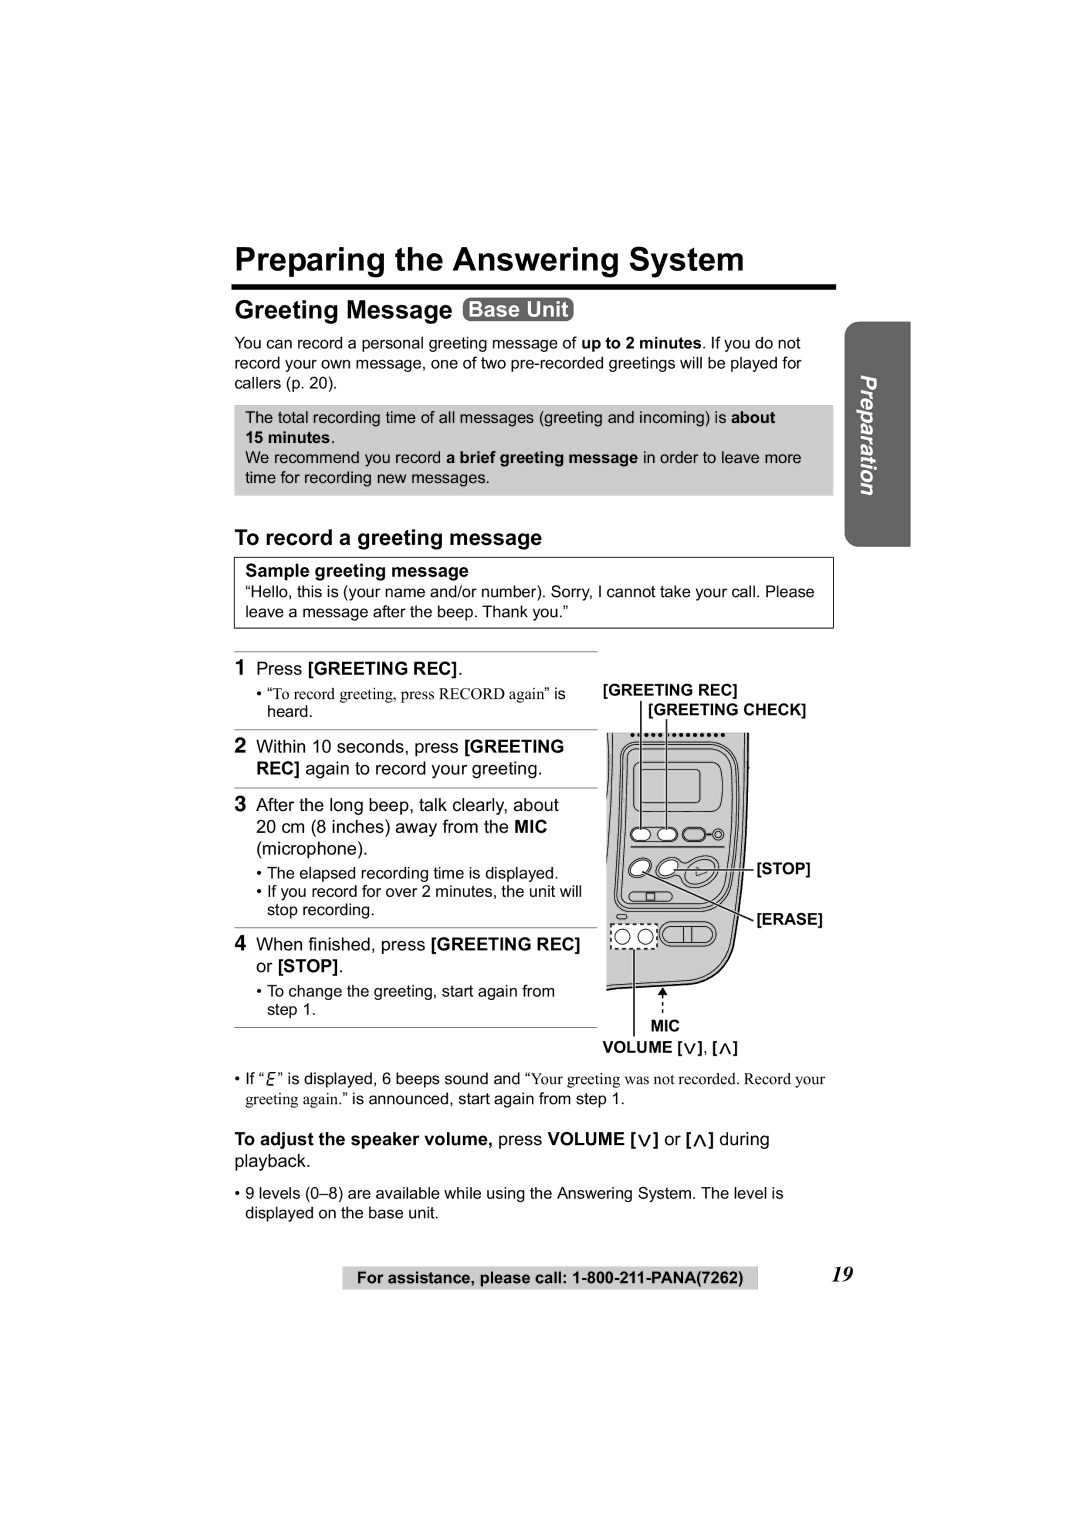 Panasonic KX-TG2344 manual Preparing the Answering System, Greeting Message Base Unit, To record a greeting message 